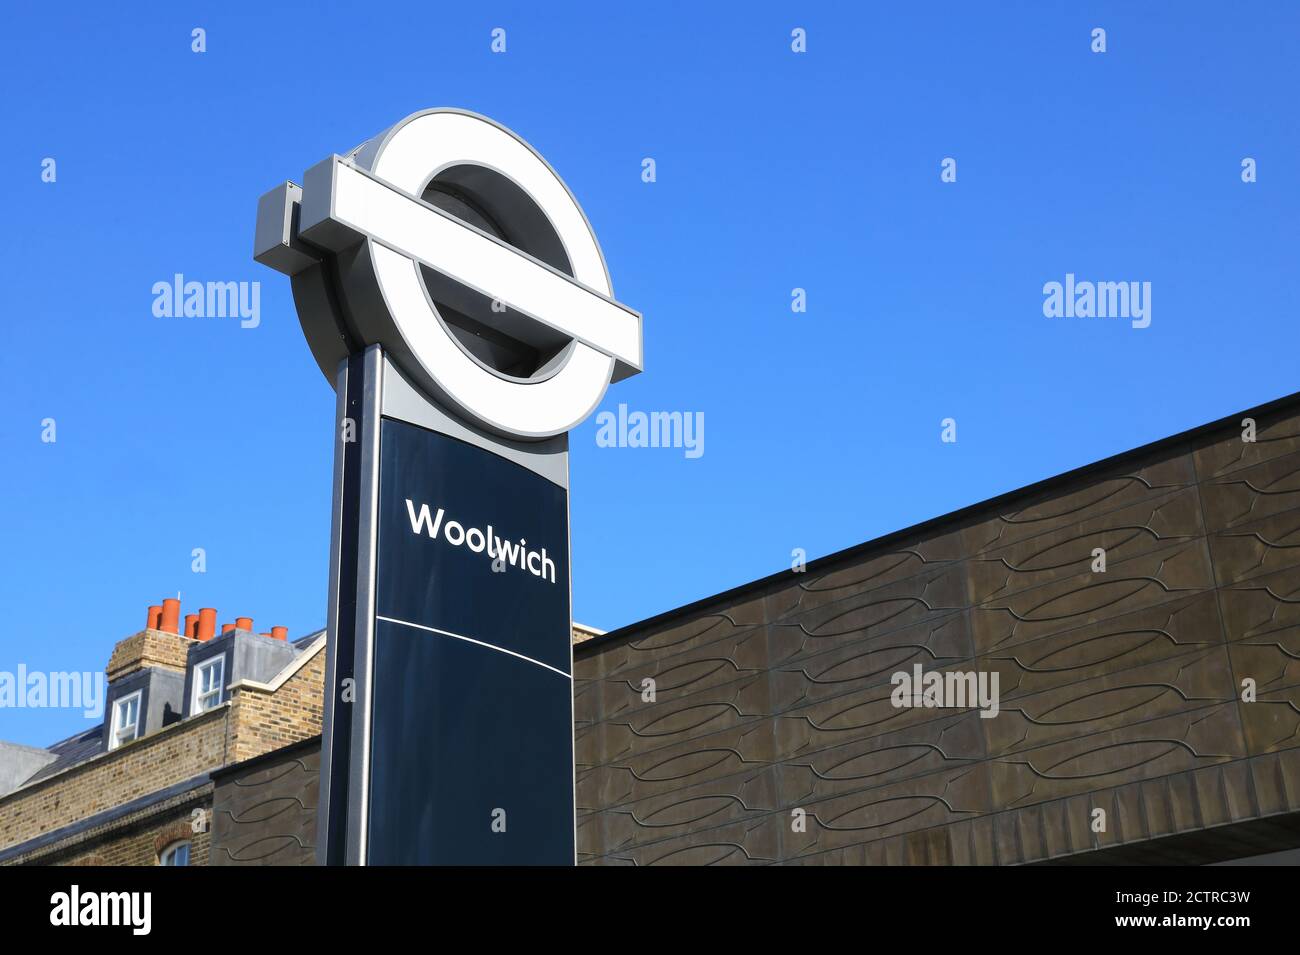 Exterior of the new Crossrail station at Woolwich due to open soon, in SE London, UK Stock Photo